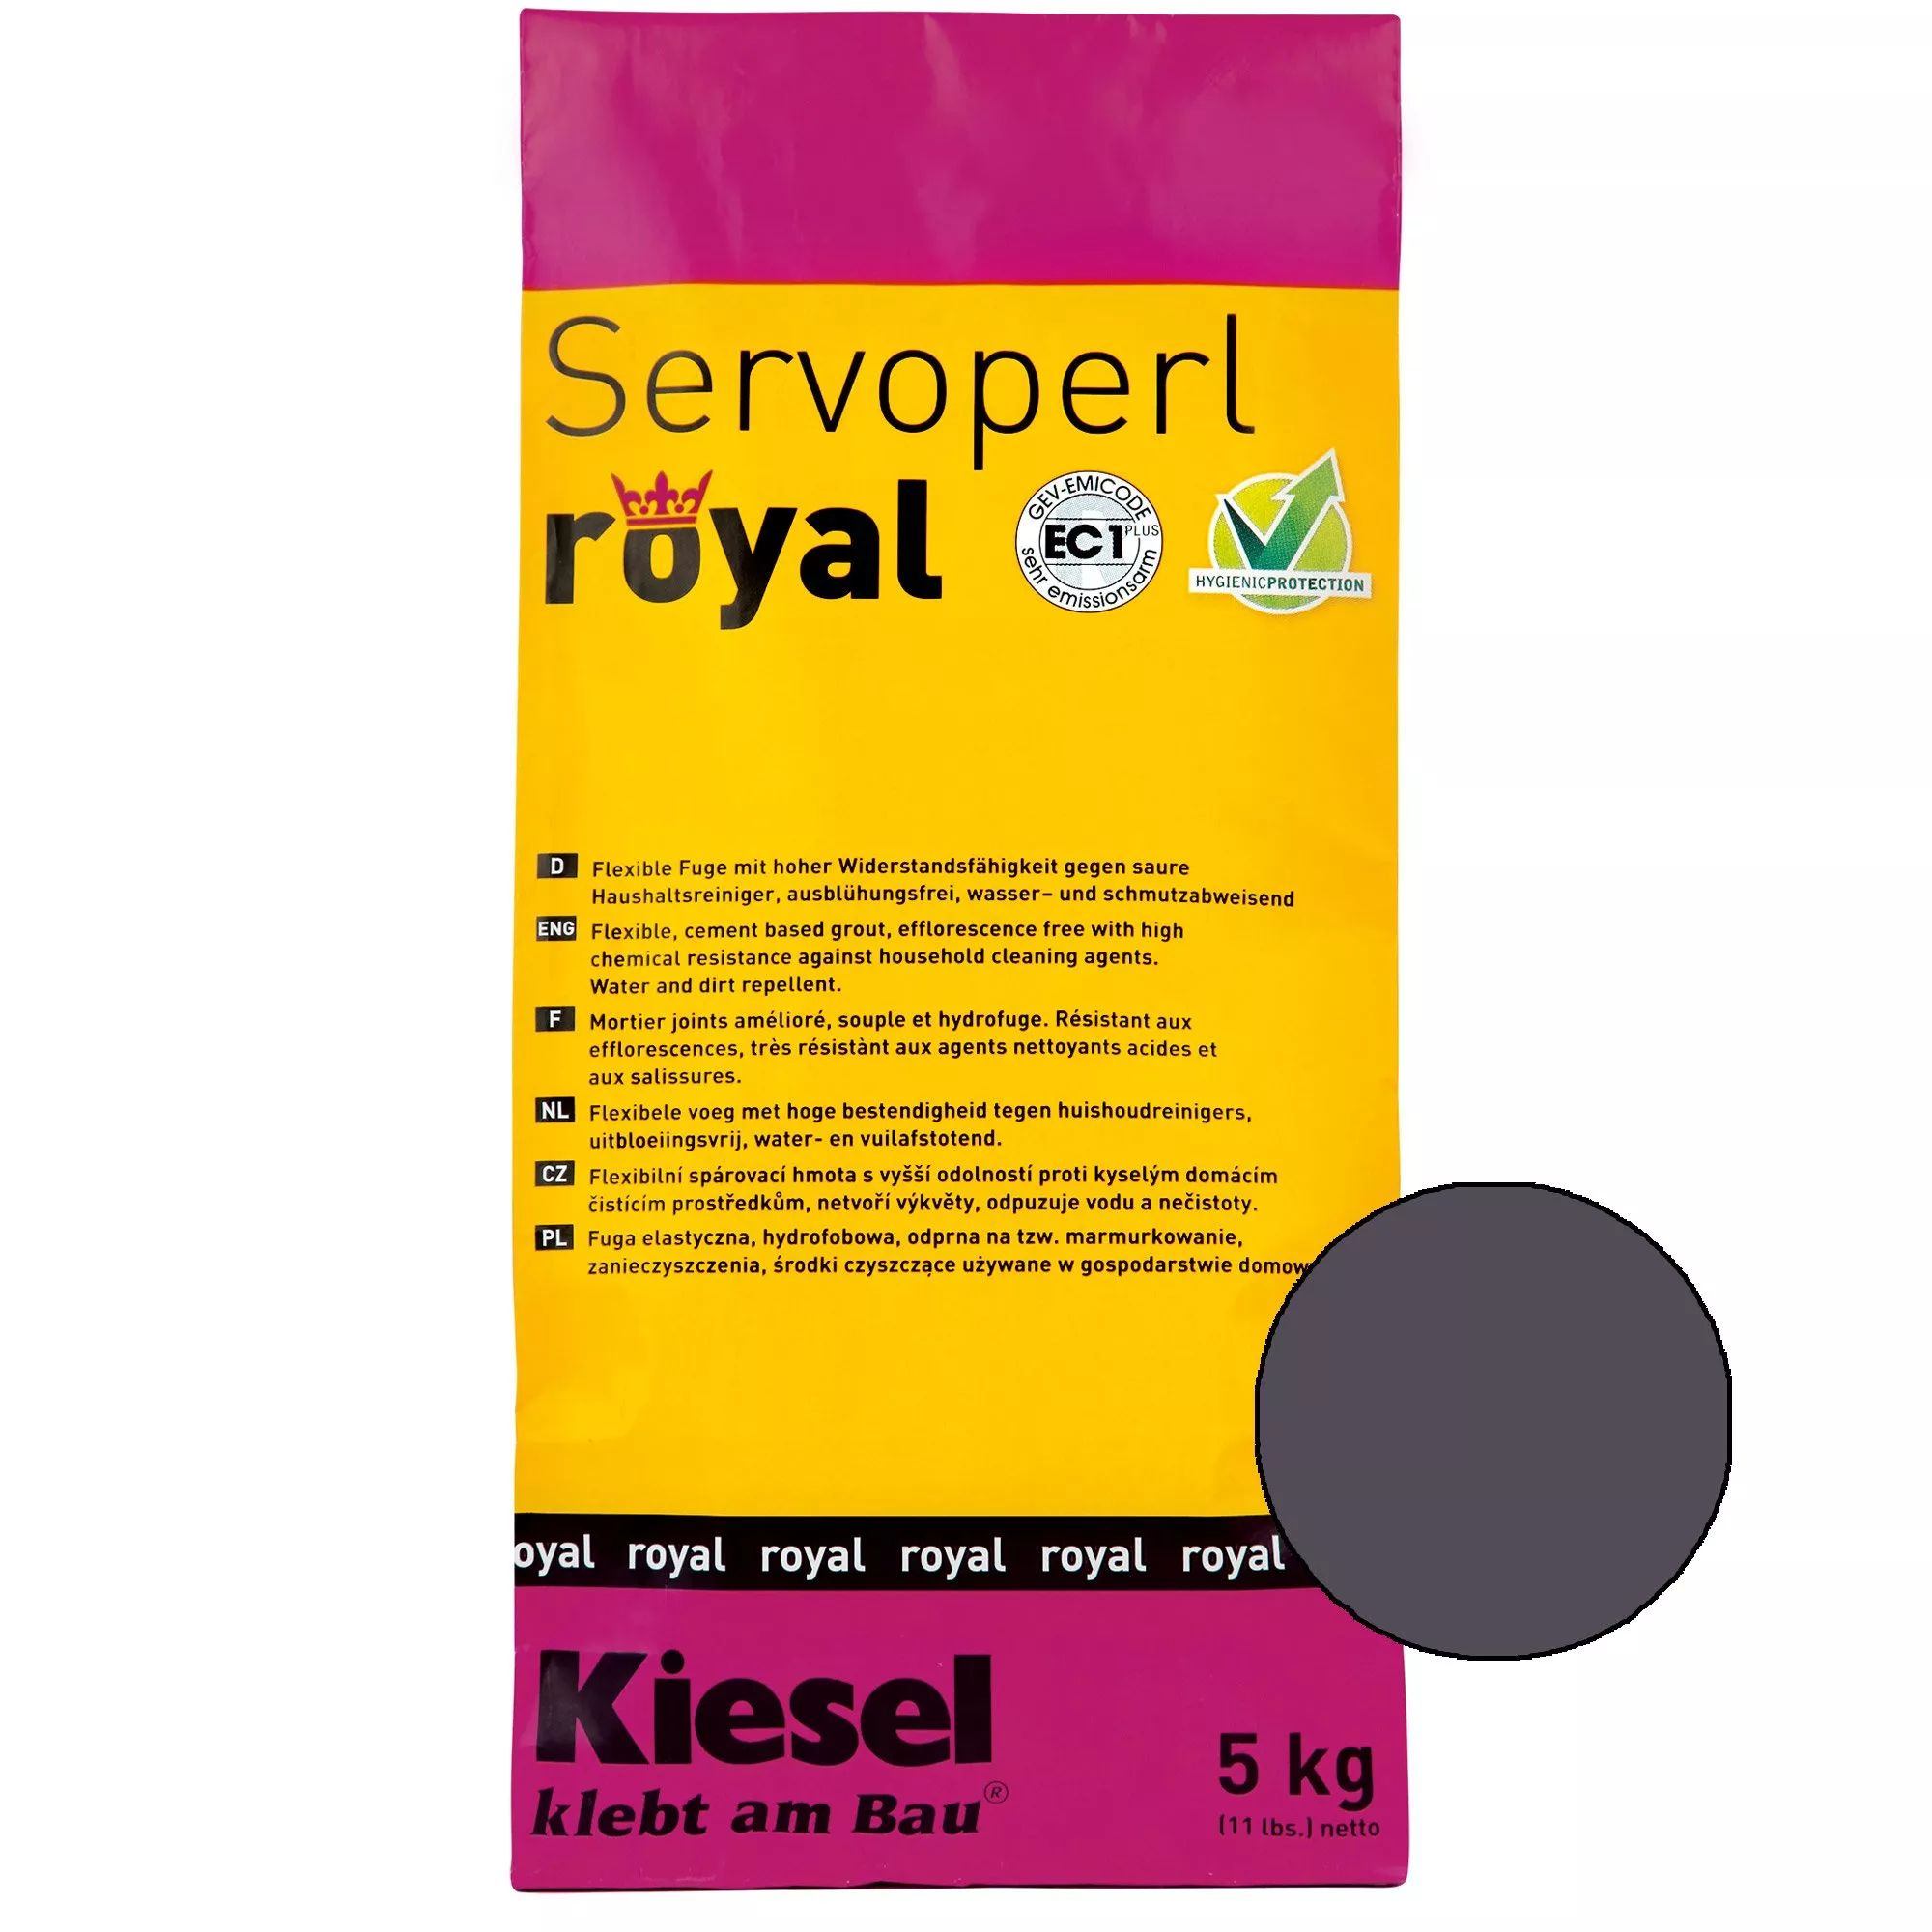 Kiesel Servoperl royal - Flexible, water- and dirt-repellent joint (5KG Shadow)